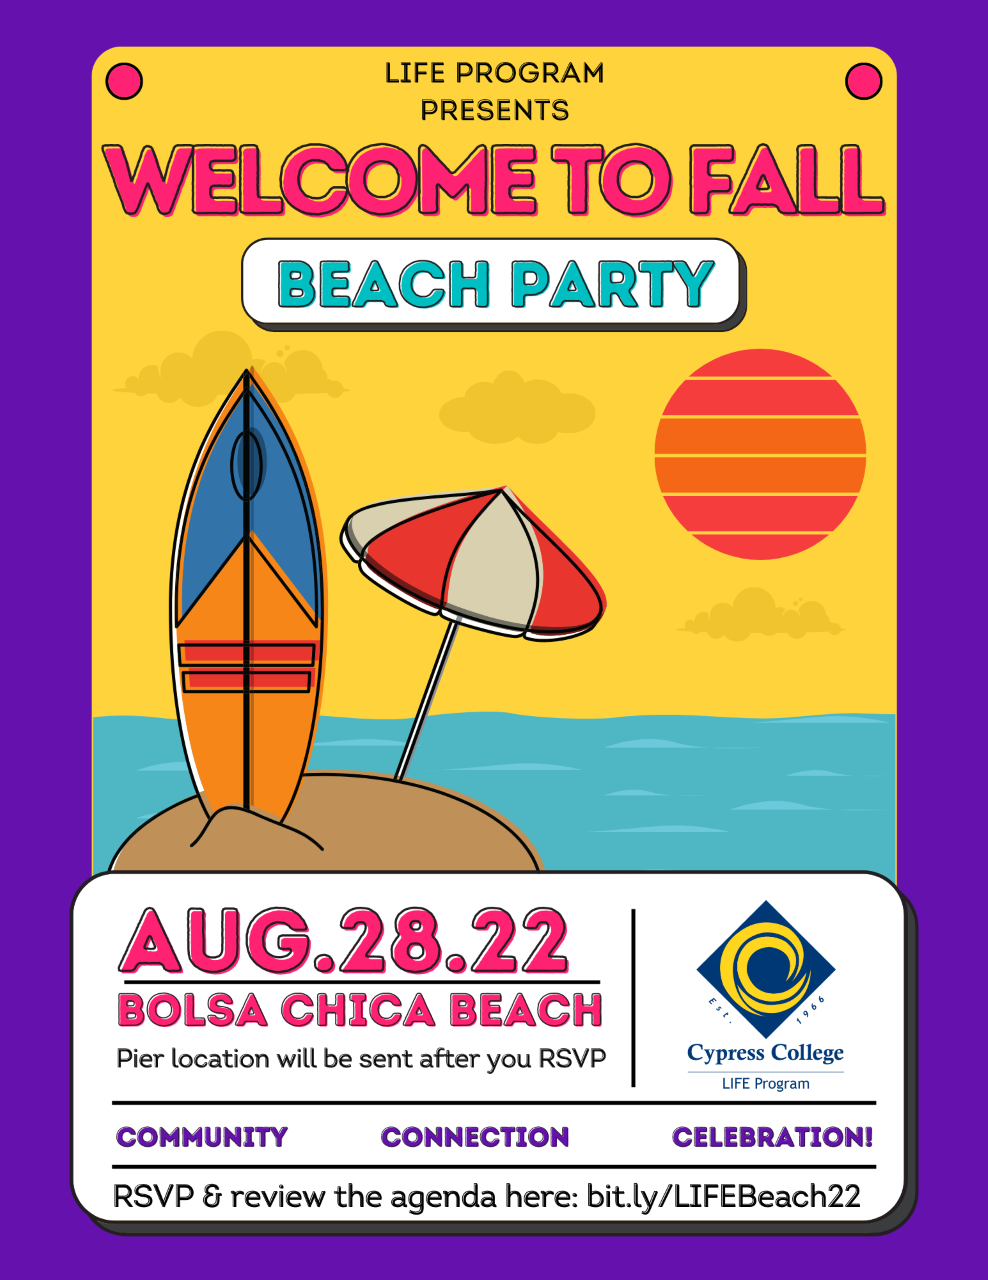 Poster with illustration of beach umbrella and surfboard in sand in front of ocean with details on event, written in post.